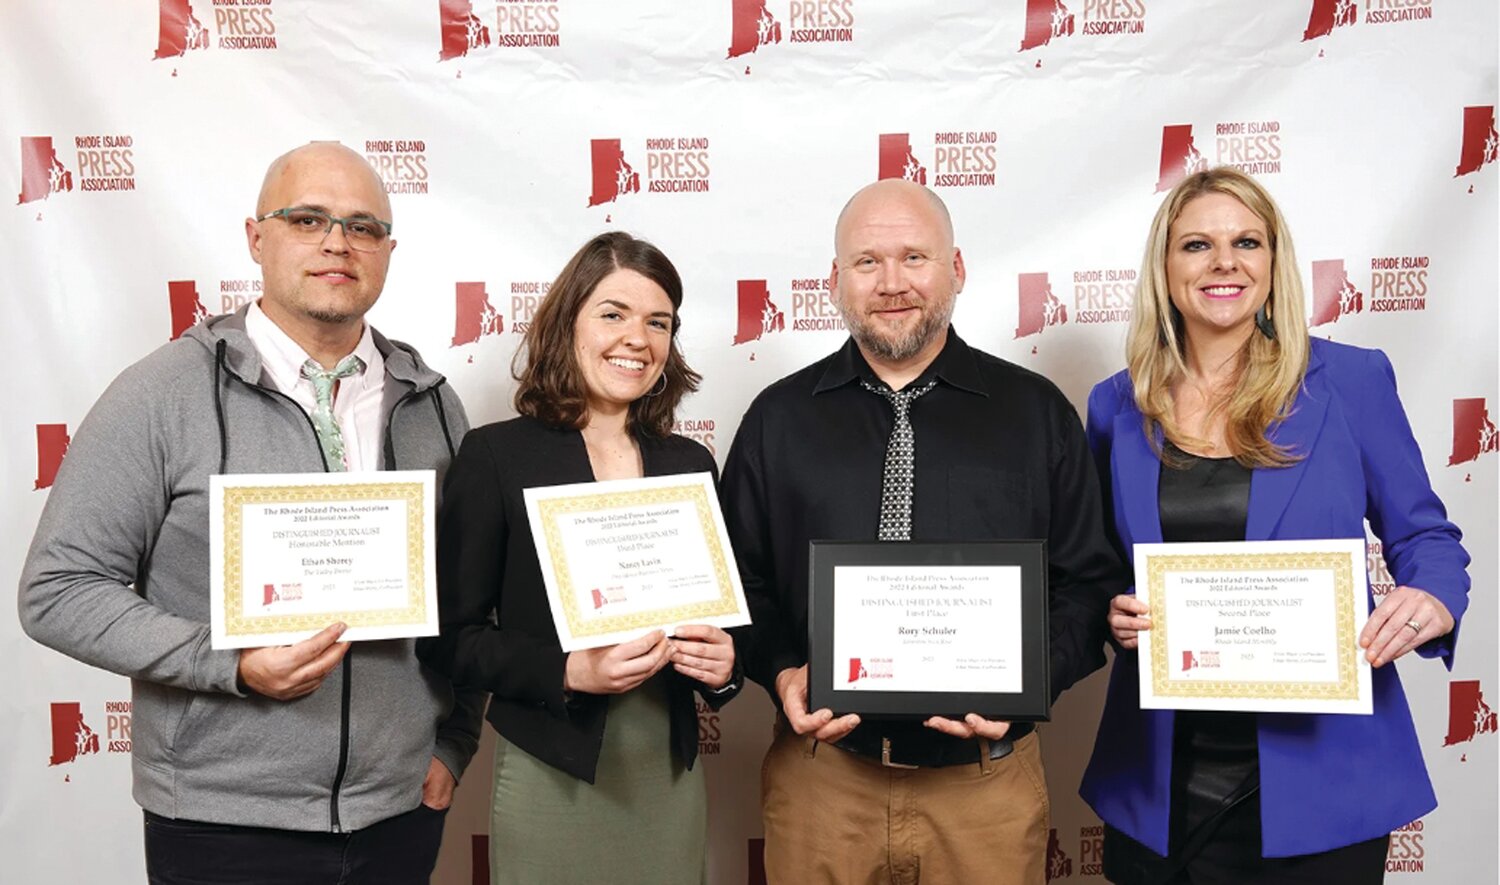 DISTINGUISHED JOURNALISTS: The four award winners in the Rhode Island Press Association ‘S 2022 Distinguished Journalist category: from left to right, Honorable Mention, Ethan Shorey, The Valley Breeze;  Third Place Nancy Lavin, Providence Business News; First Place, Rory Schuler, Johnston Sun Rise; and Second Place, Jamie Coelho, Rhode Island Monthly.